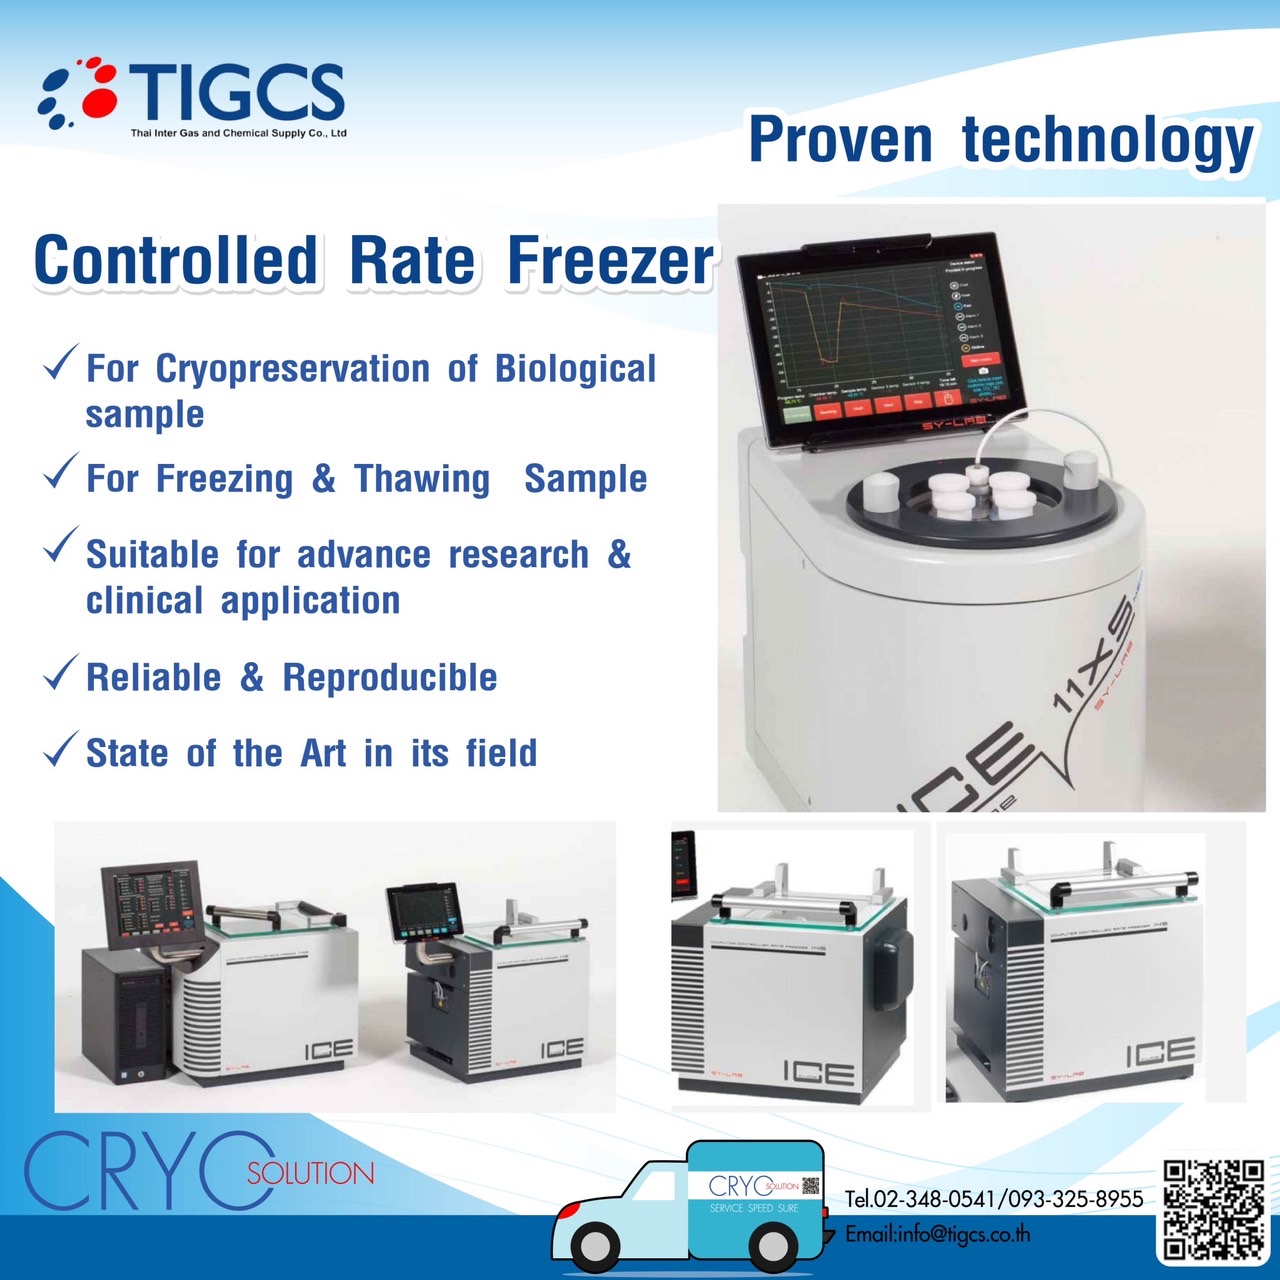 For Cryopreservation of Biological sample For Freezing & Thawing Sample Suitable for advance research & clinical application Reliable & Reproducible State of the Art in its field